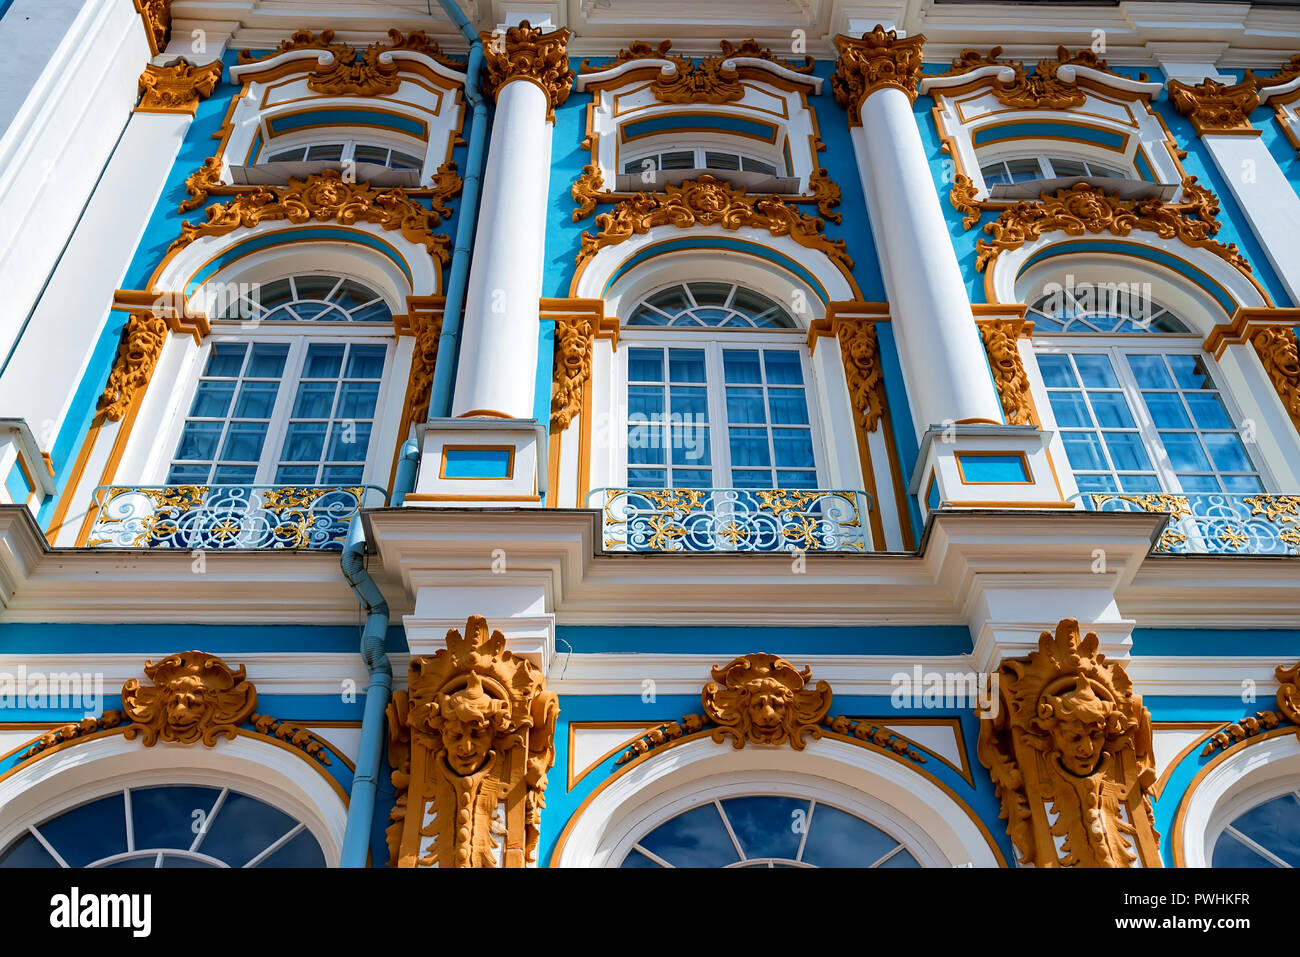 Detail of Catherine's II Palace in Tsarskoe Selo, Russia Stock Photo